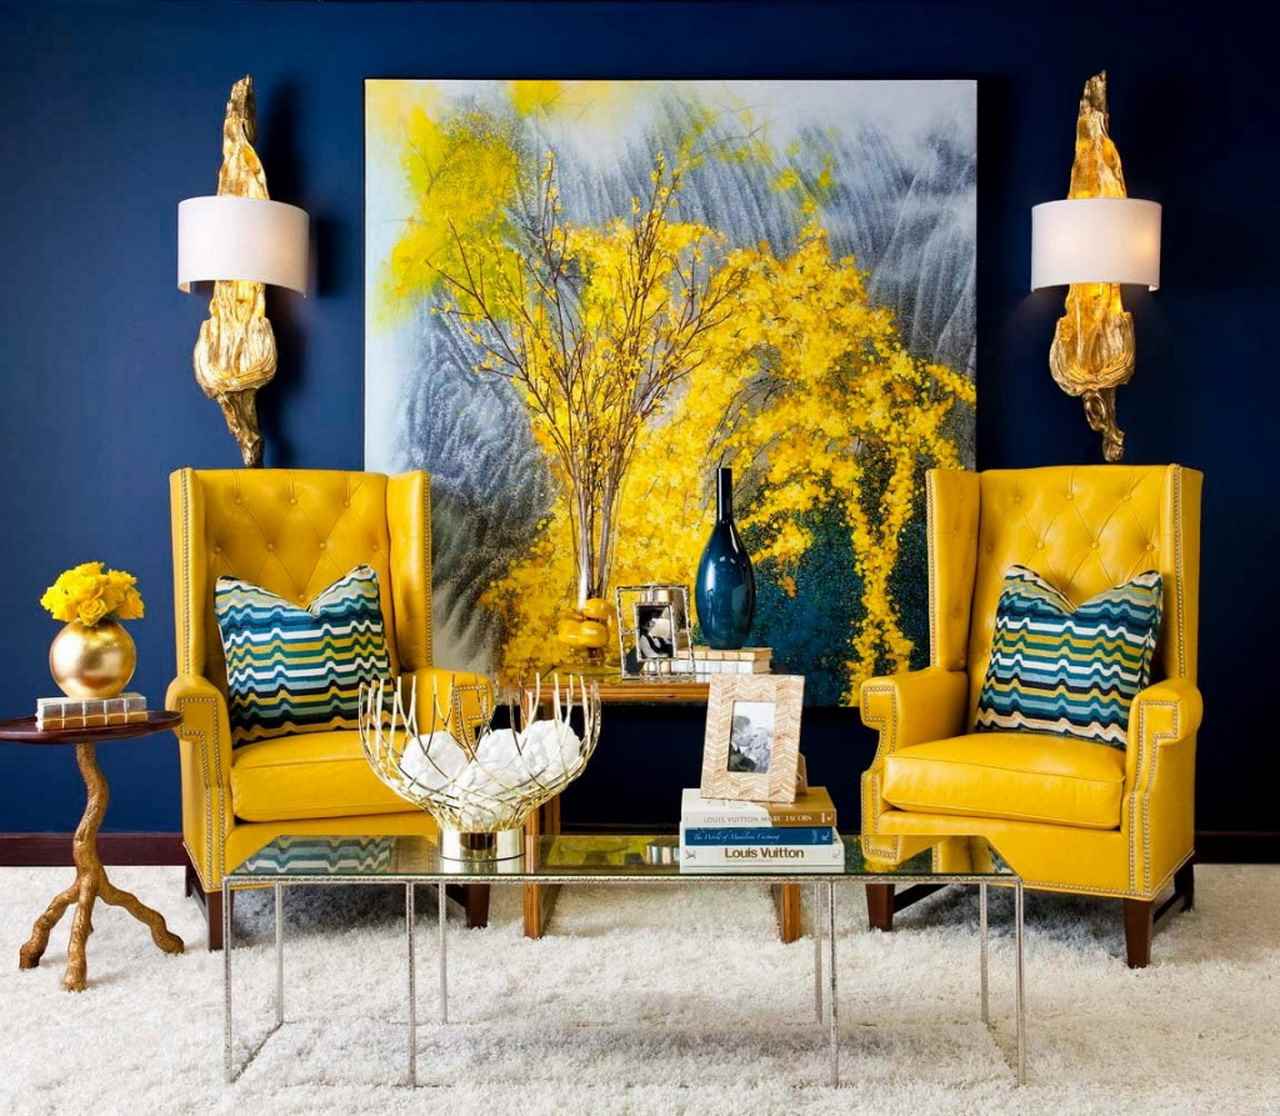 the option of using bright yellow in the decor of the room